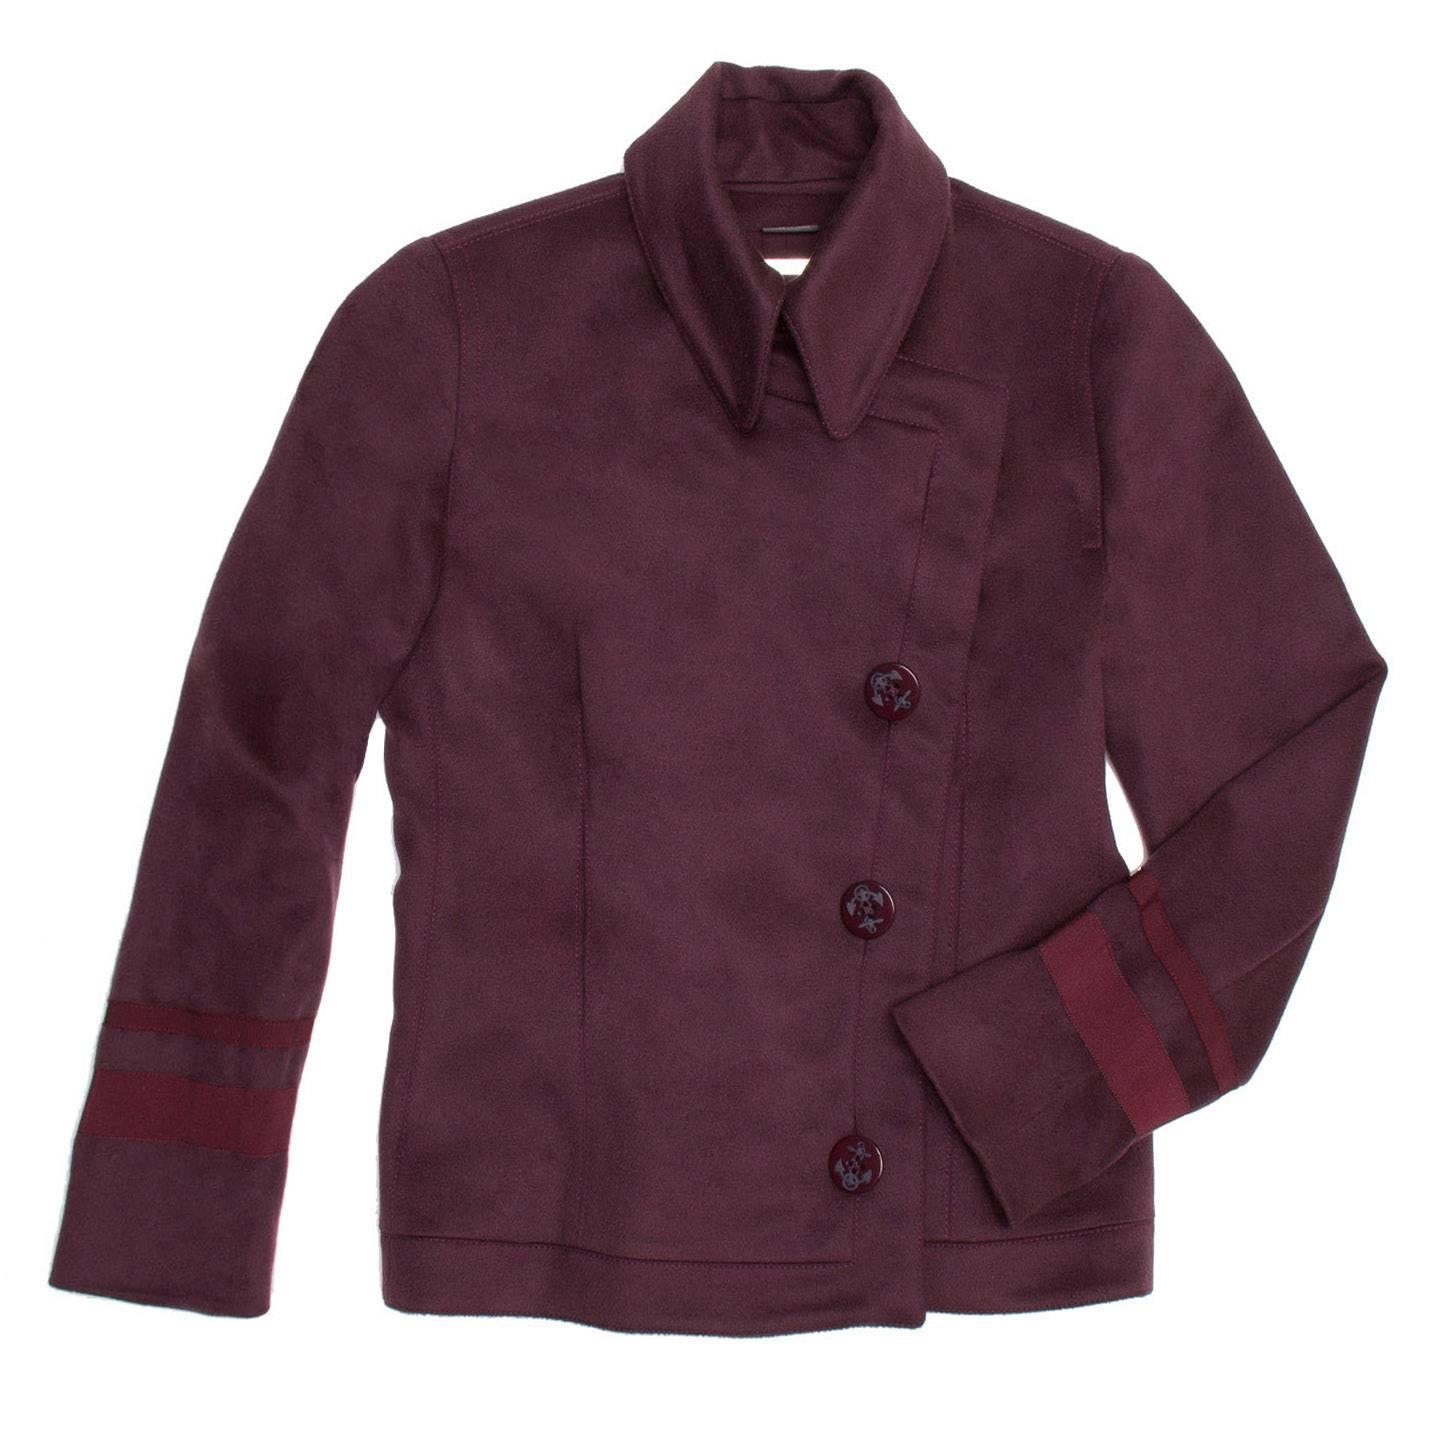 Burgundy cashmere cropped peacoat that tapers at the bottom for a nice feminine fit. Asymmetrical front closure with Anchor 4-holed buttons. Naval stripe detailing on sleeves. Back tail vent.

Size  44 Italian sizing

Condition  Excellent: worn